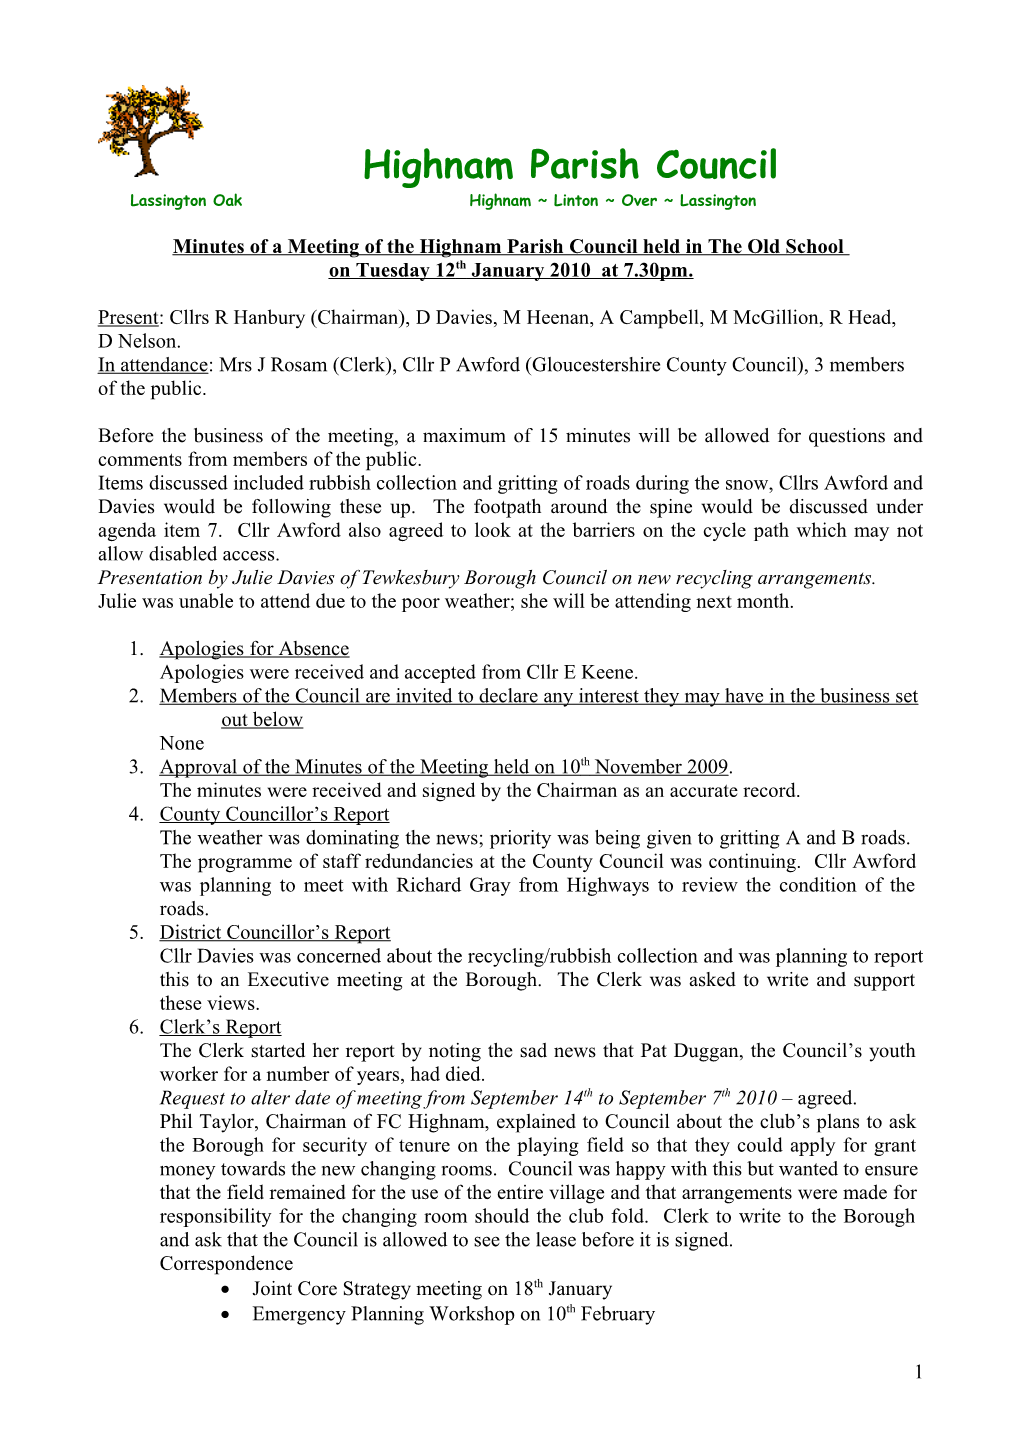 Minutes Ofa Meeting of the Highnam Parish Council Held in the Old School